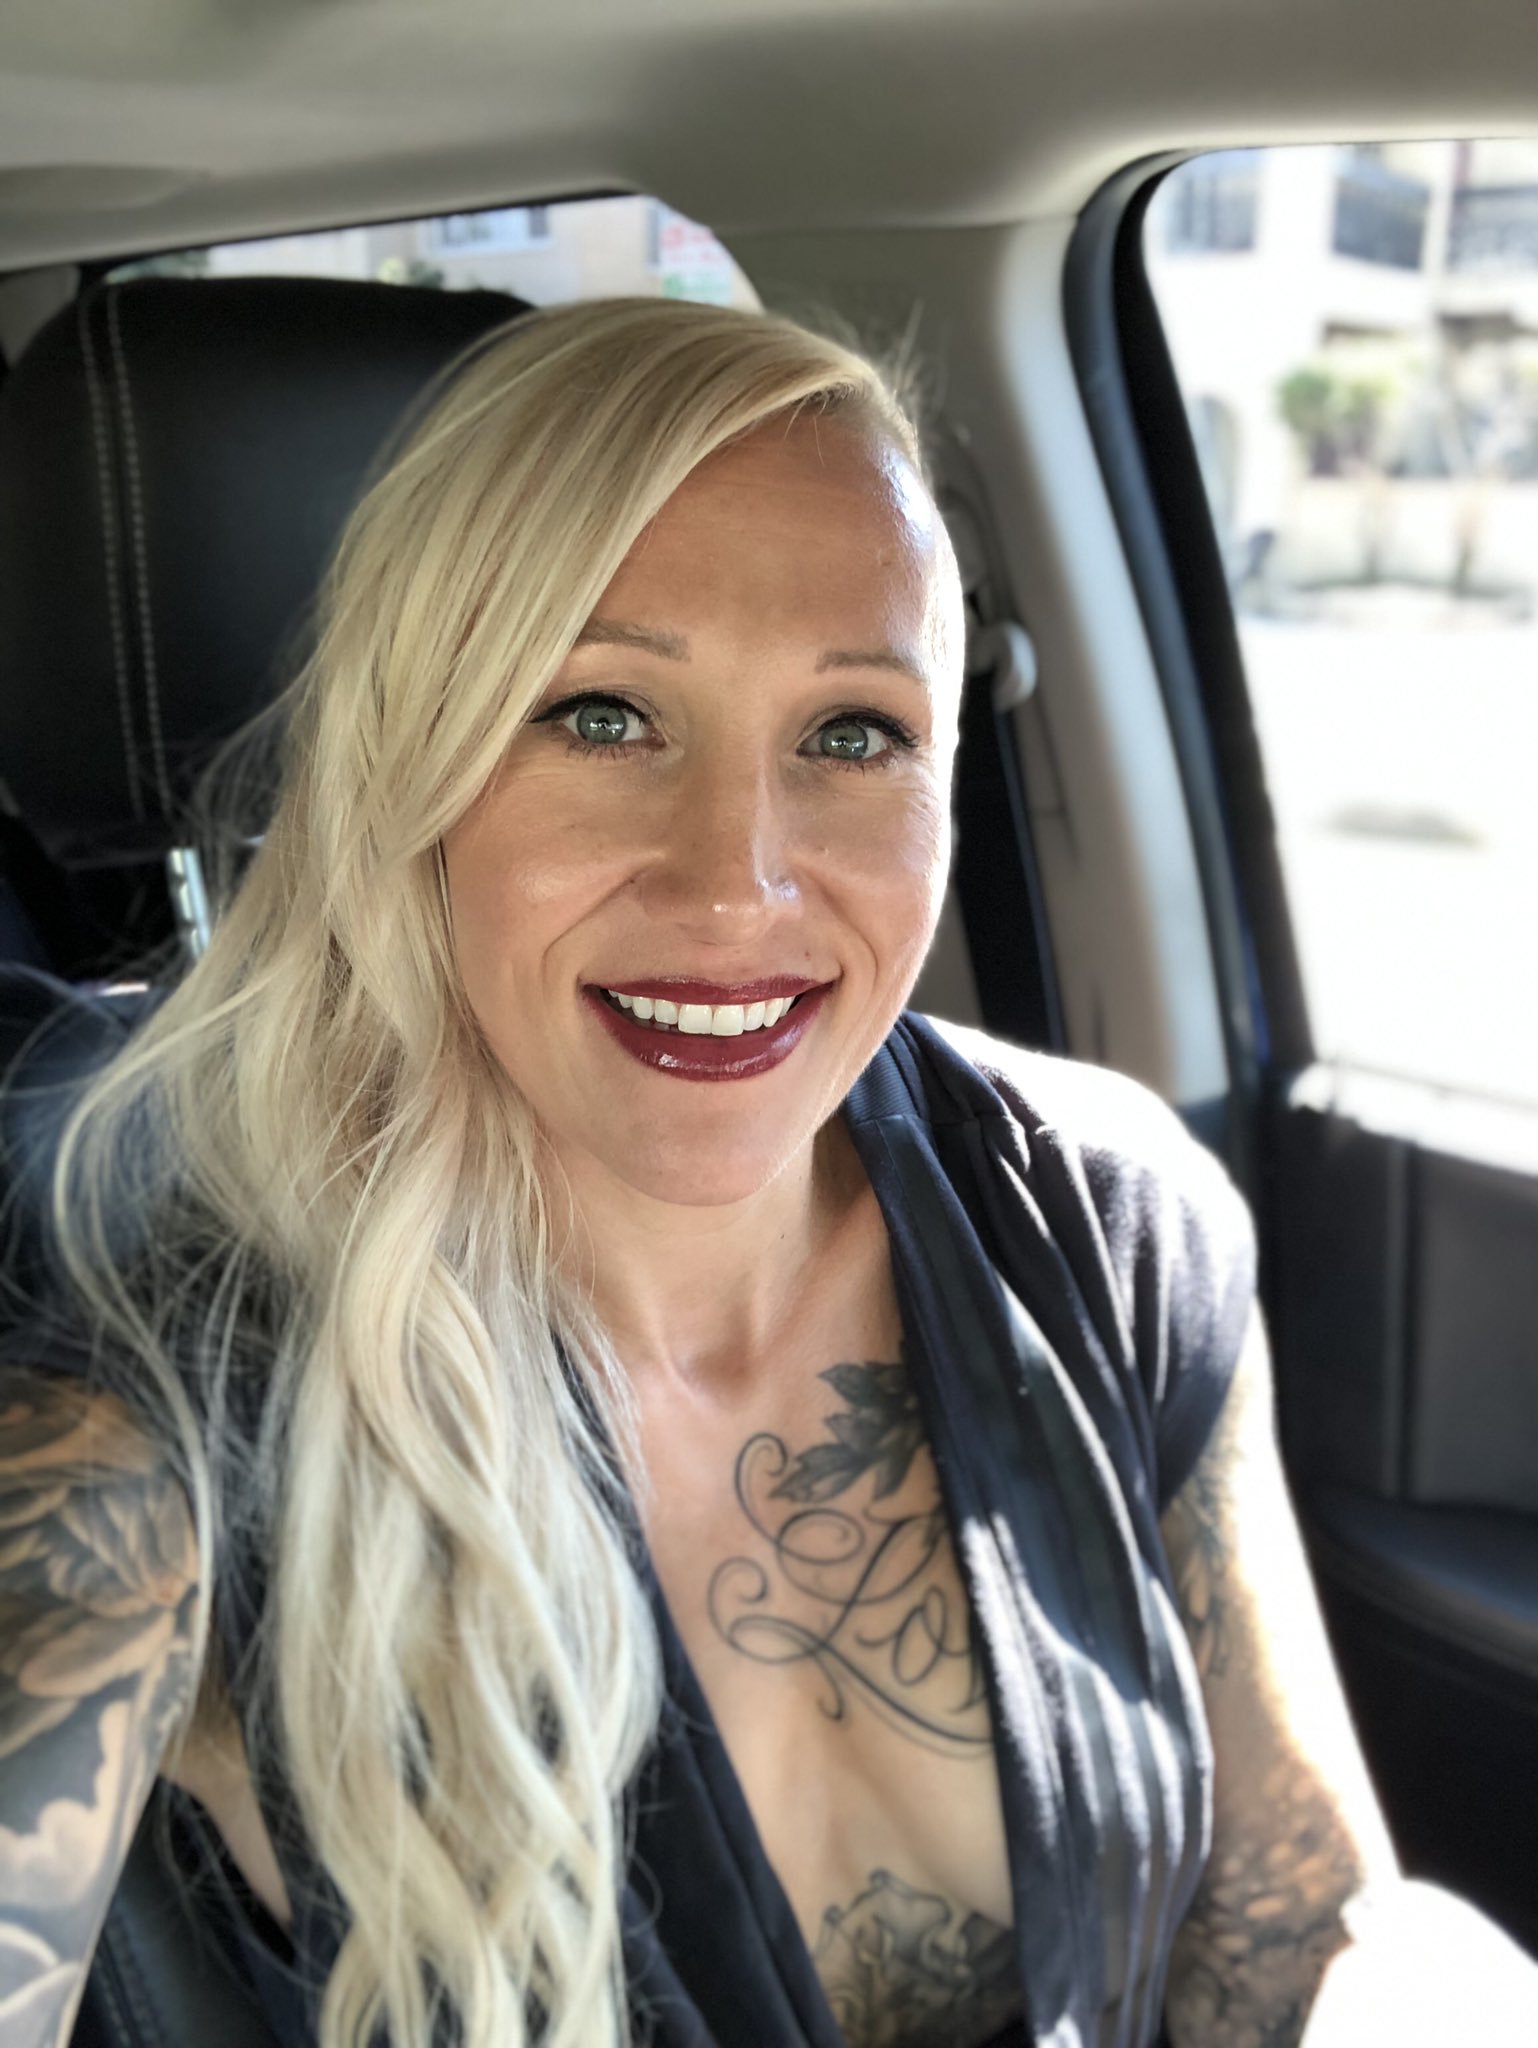 Bobsledder Kaillie Humphries receives release from Canada to join U.S.